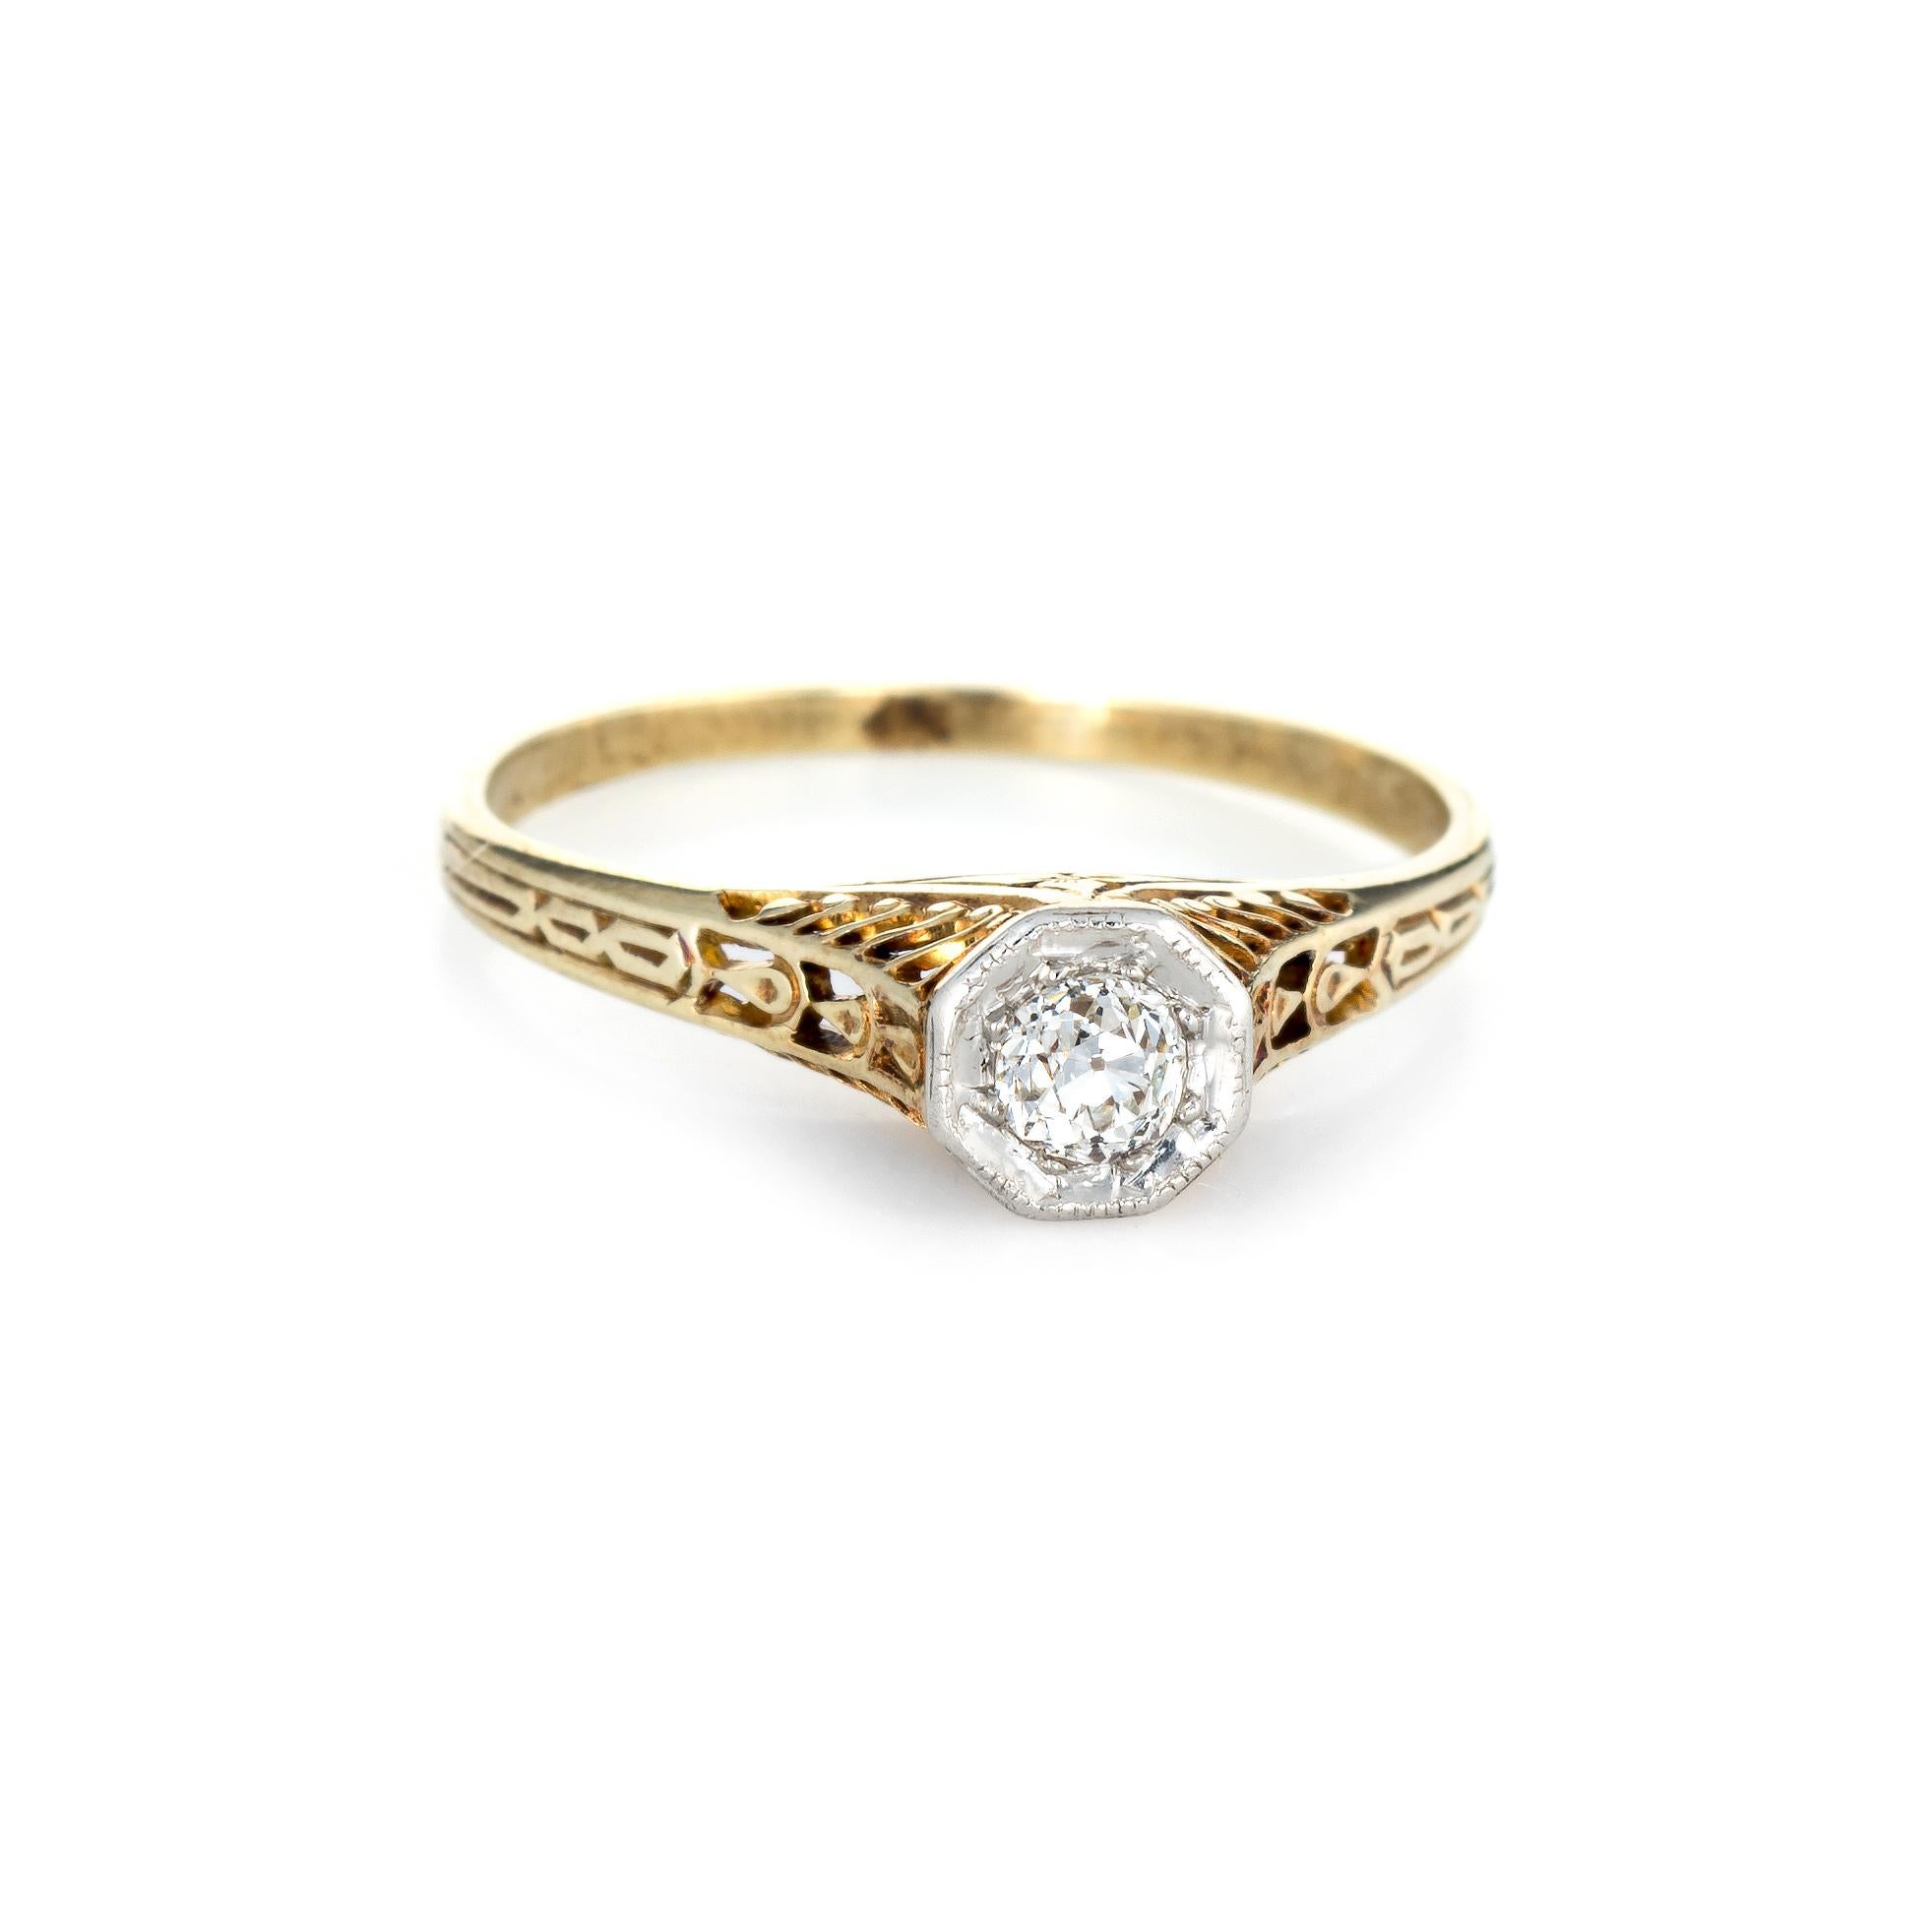 Finely detailed vintage Art Deco era ring (circa 1920s to 1930s) crafted in 14 karat yellow gold. 

Centrally mounted estimated 0.15 carat old mine cut diamond is estimated at I-J color and SI1-2 clarity. 

The ring features scrolled foliate detail